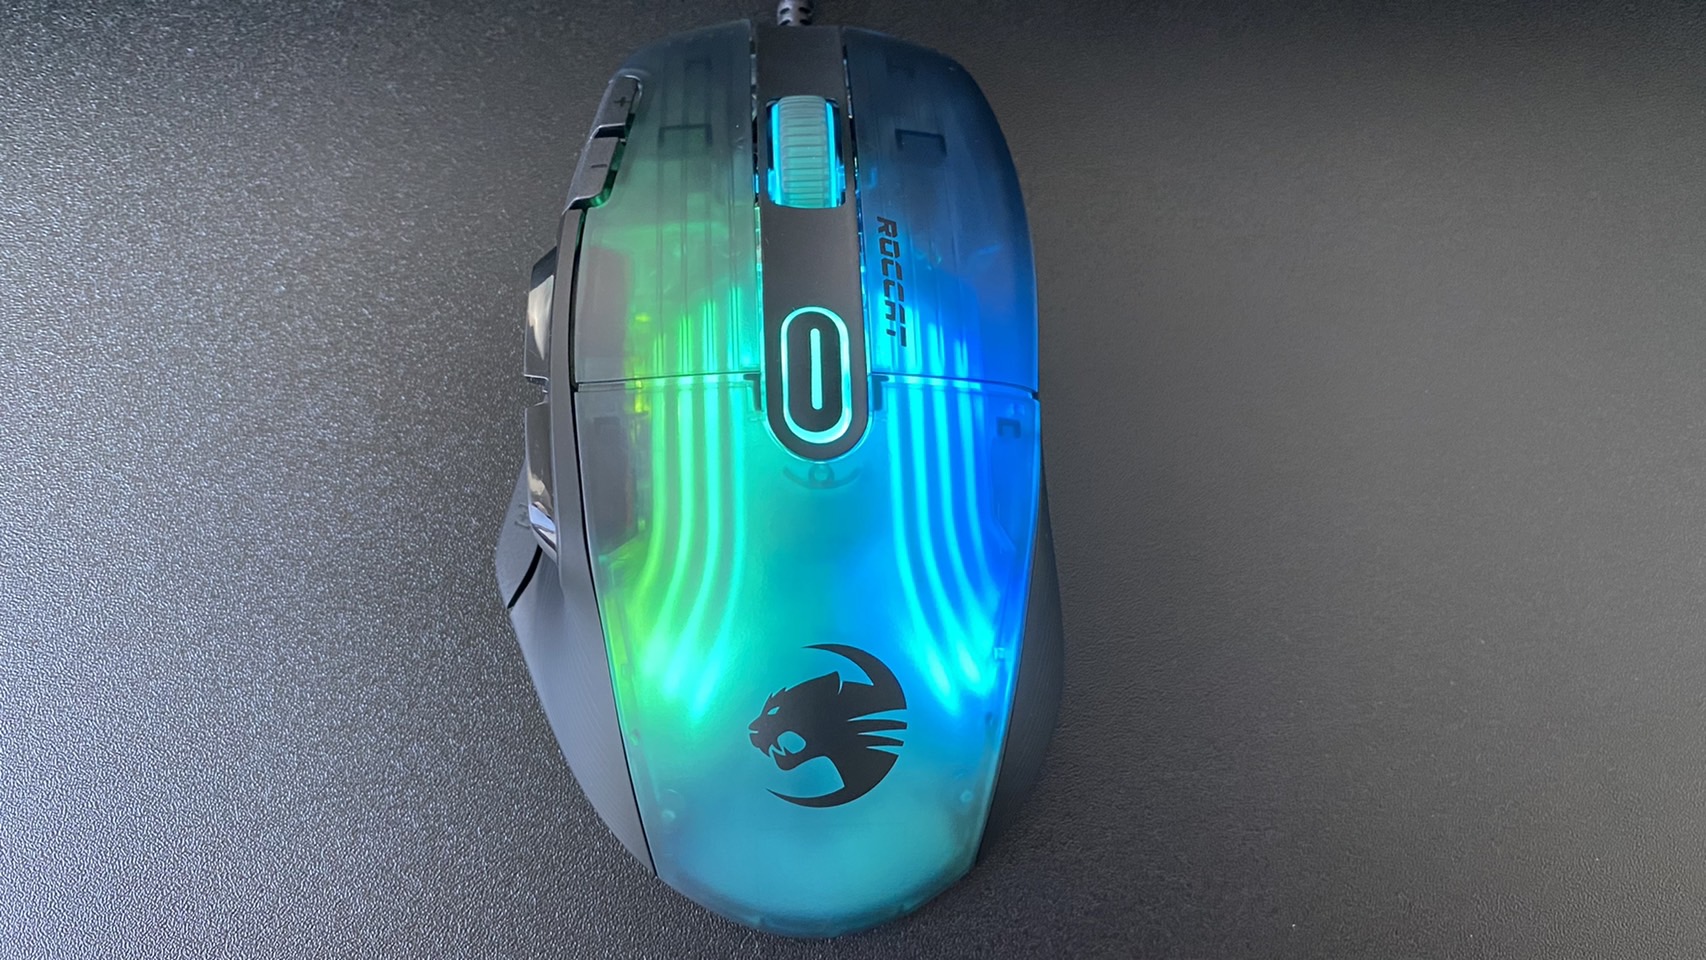 Roccat Kone XP gaming mouse review